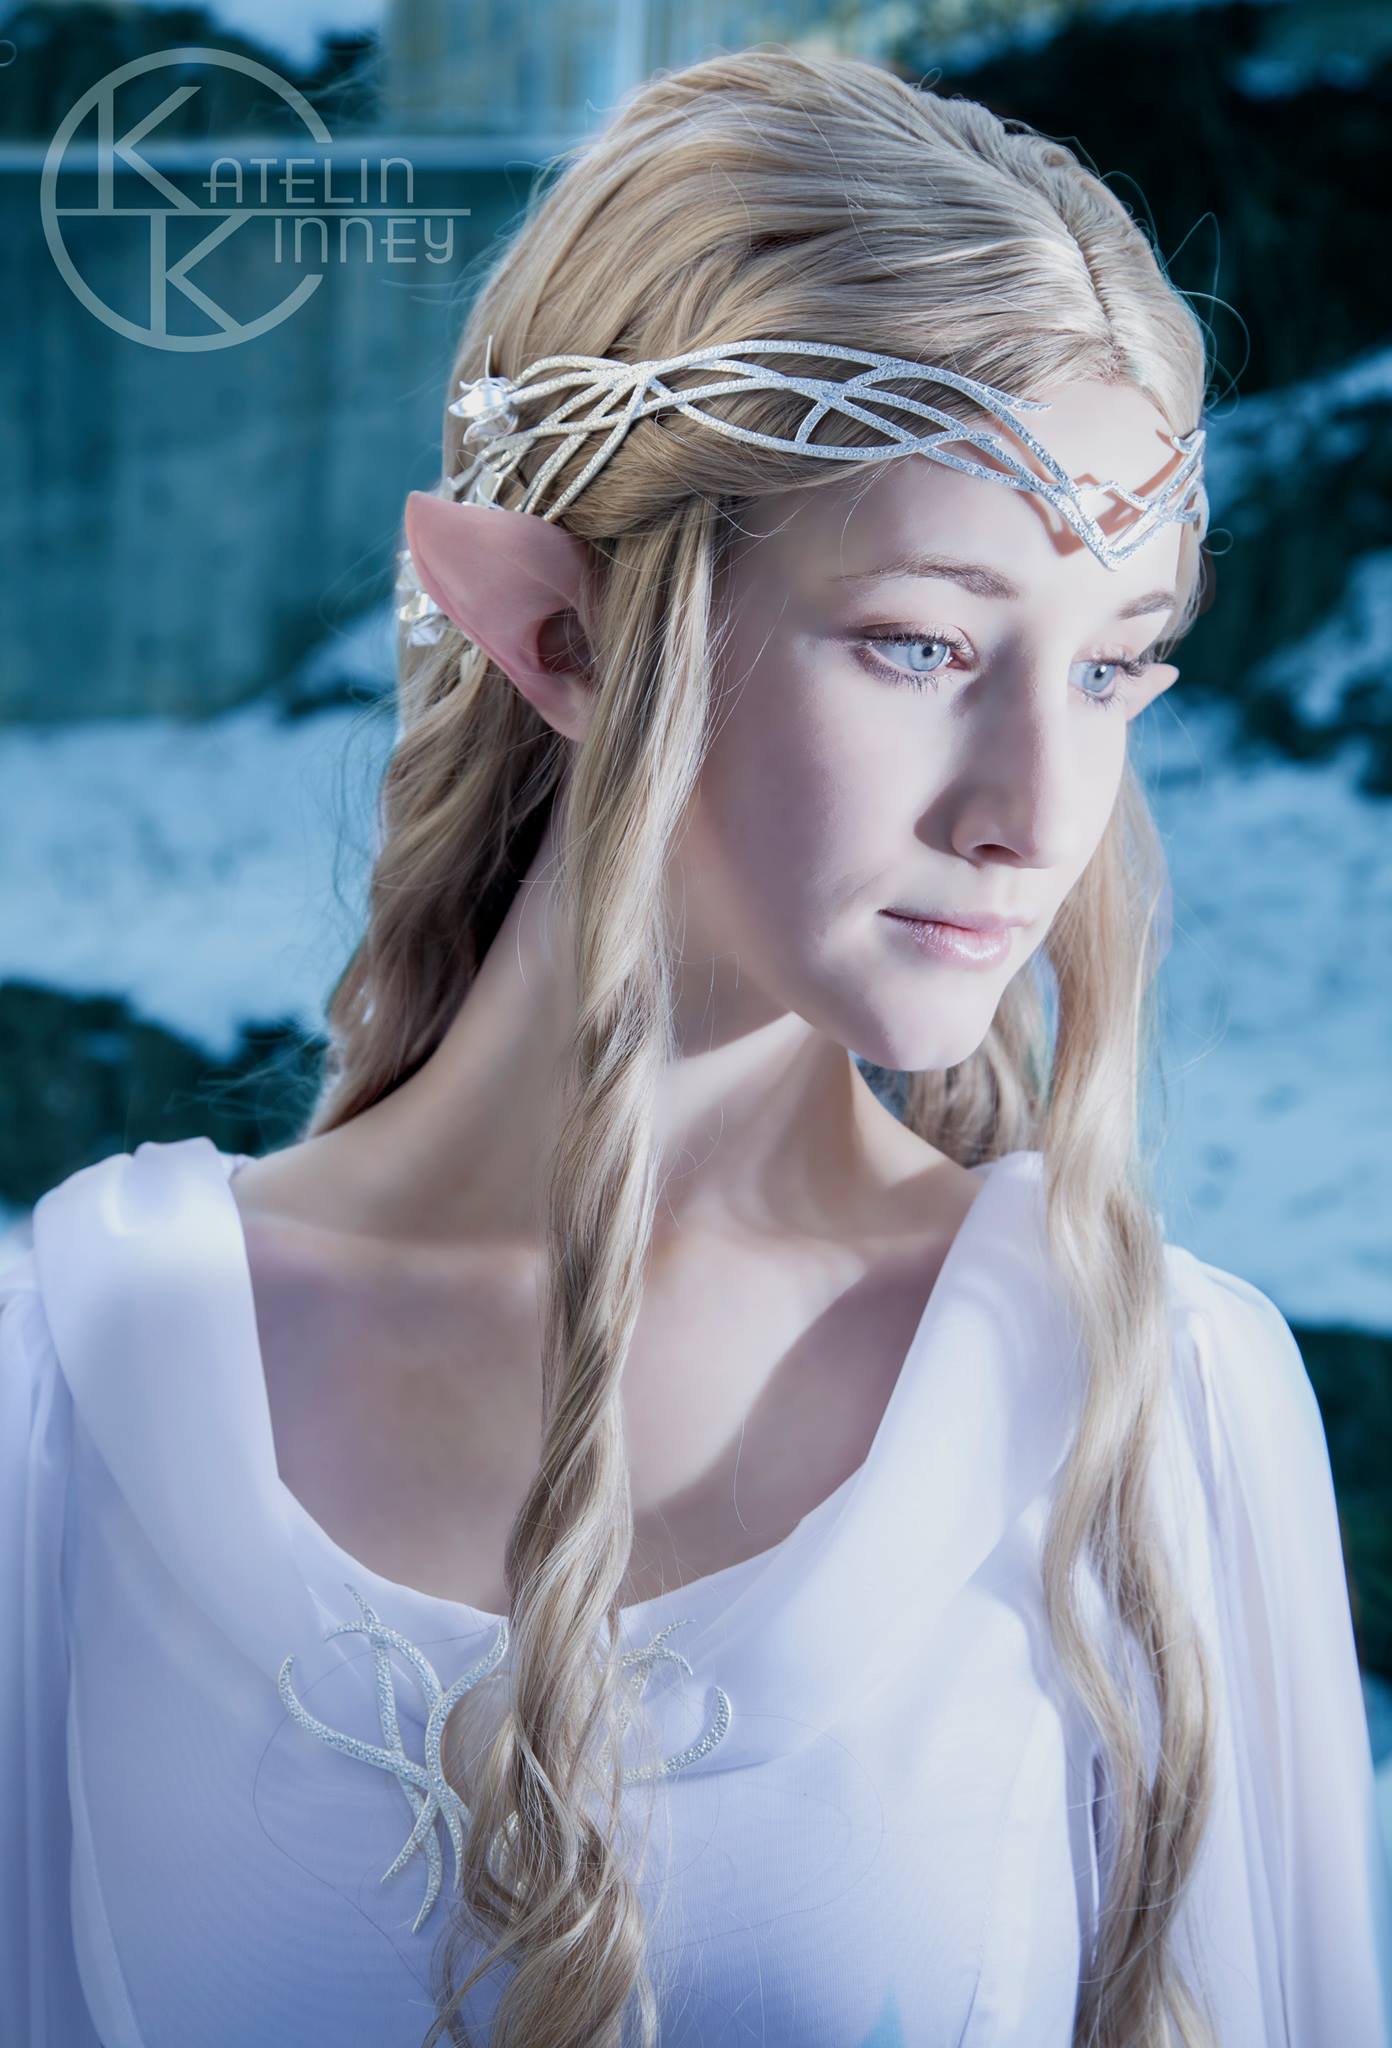 Lord of the Rings The Hobbit Lady Galadriel Cosplay Costume